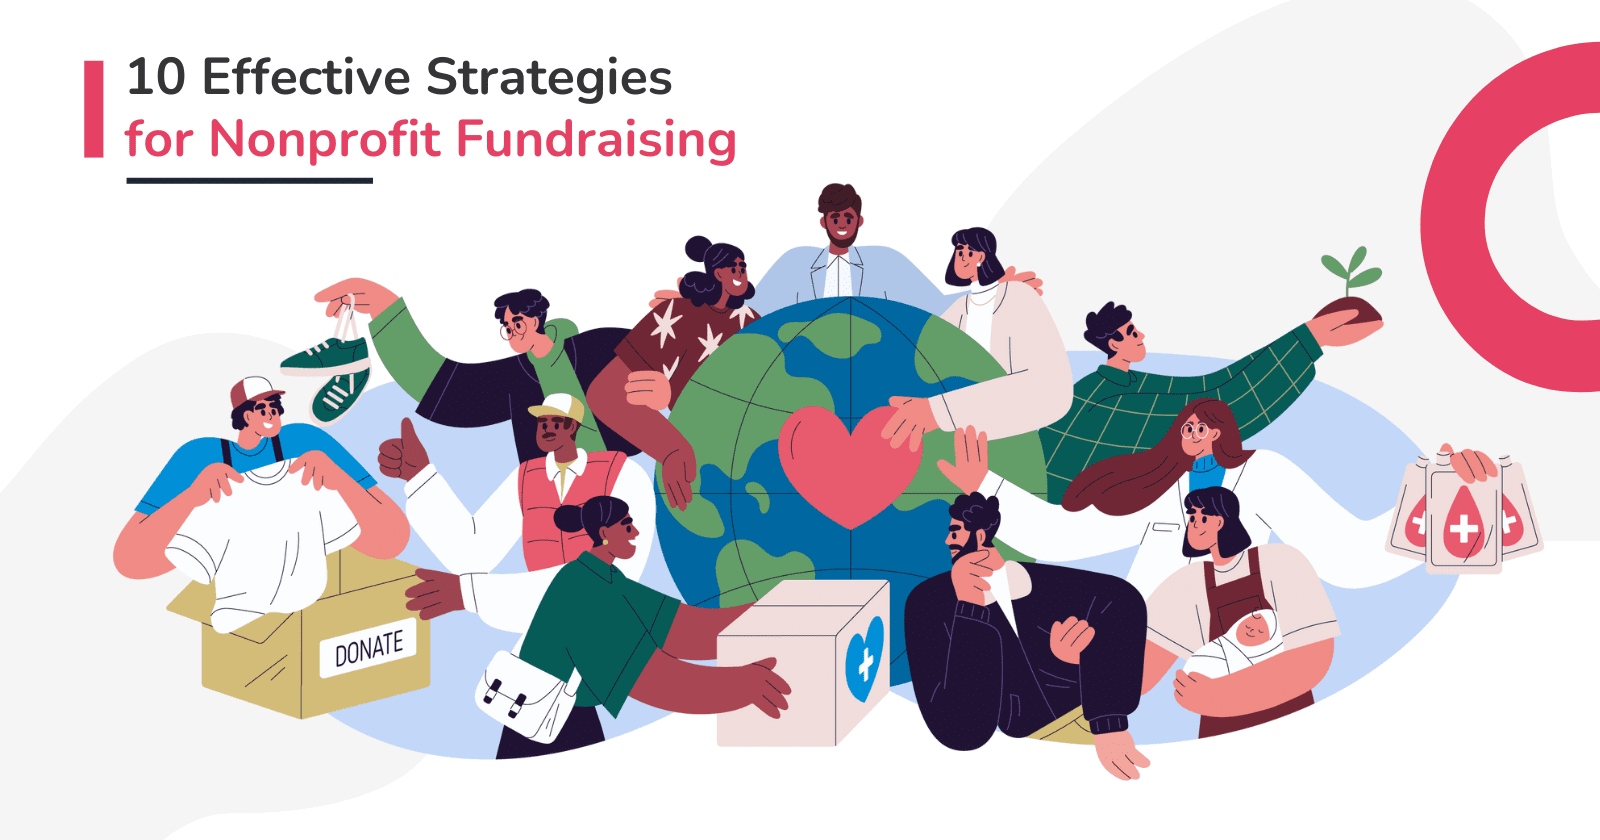 10 Effective Strategies for Nonprofit Fundraising